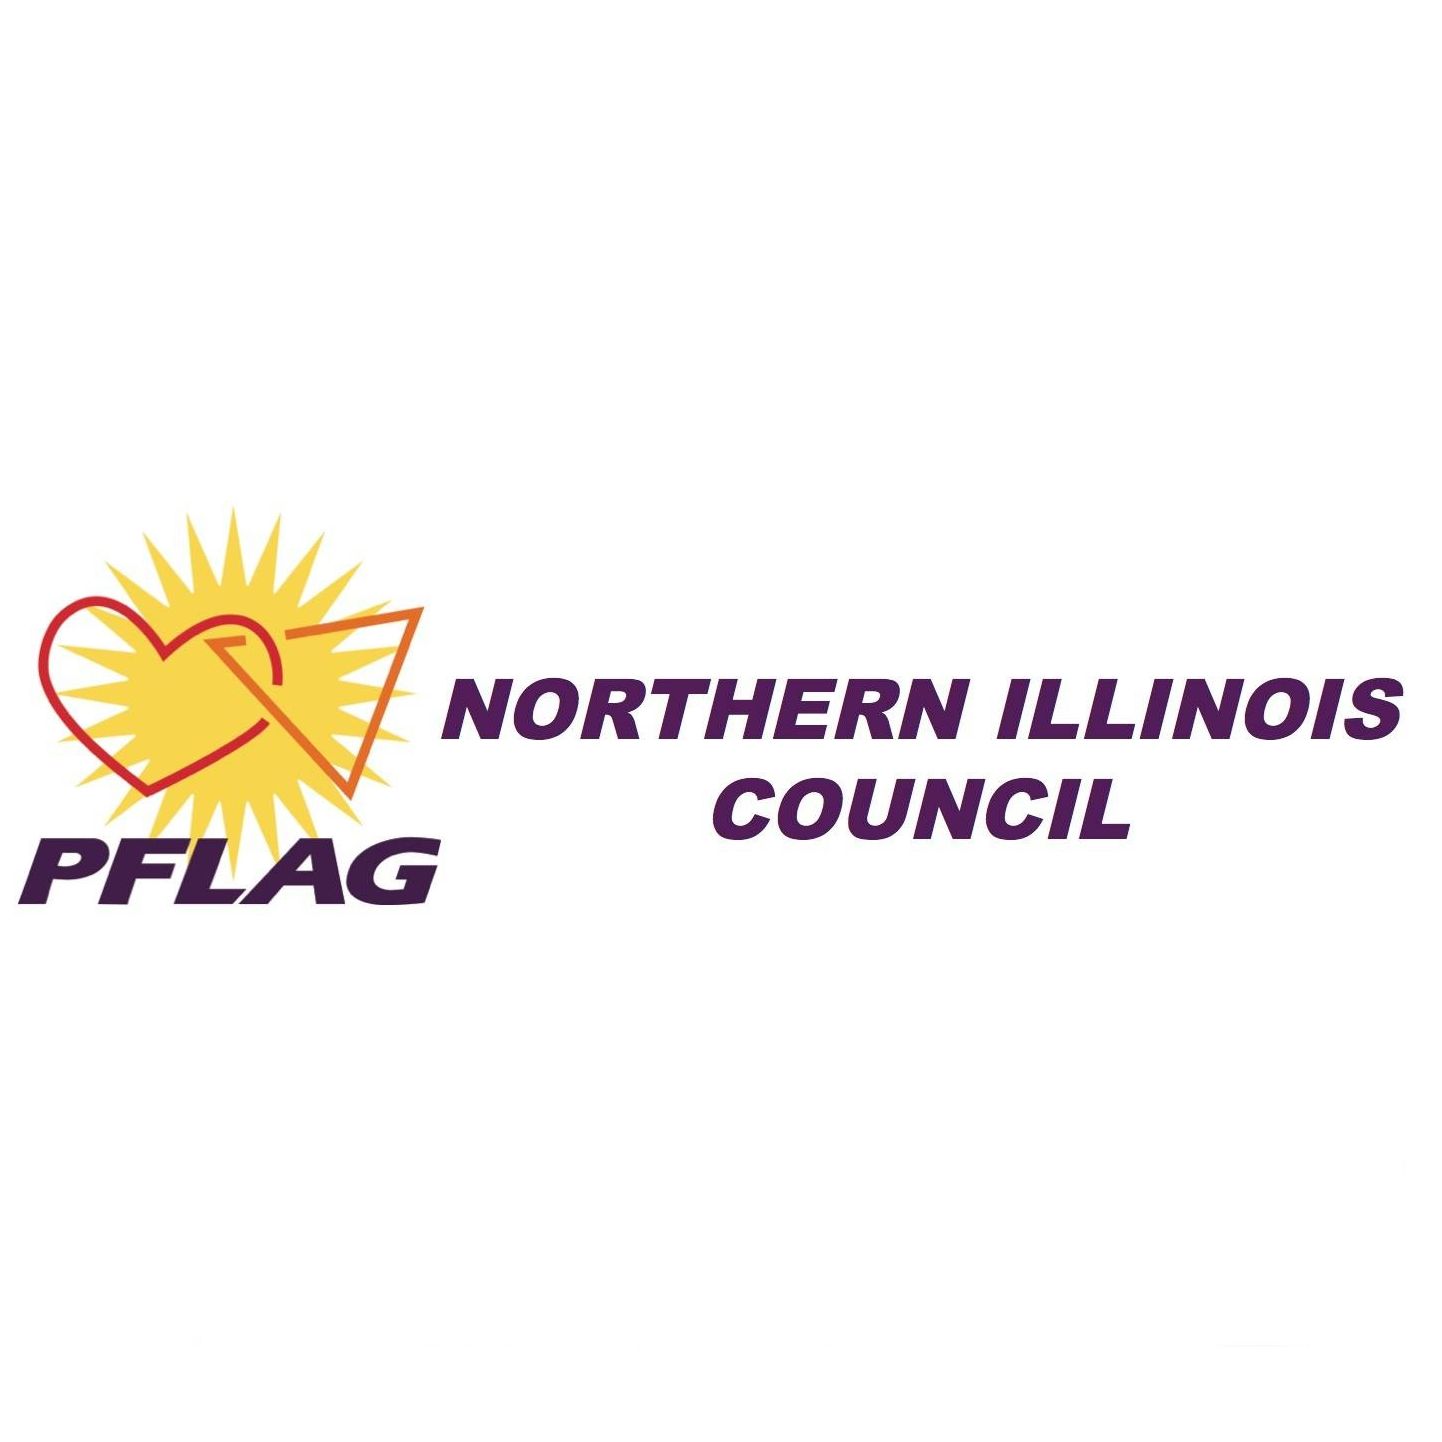 LGBTQ Organizations in Chicago Illinois - PFLAG Council of Northern Illinois